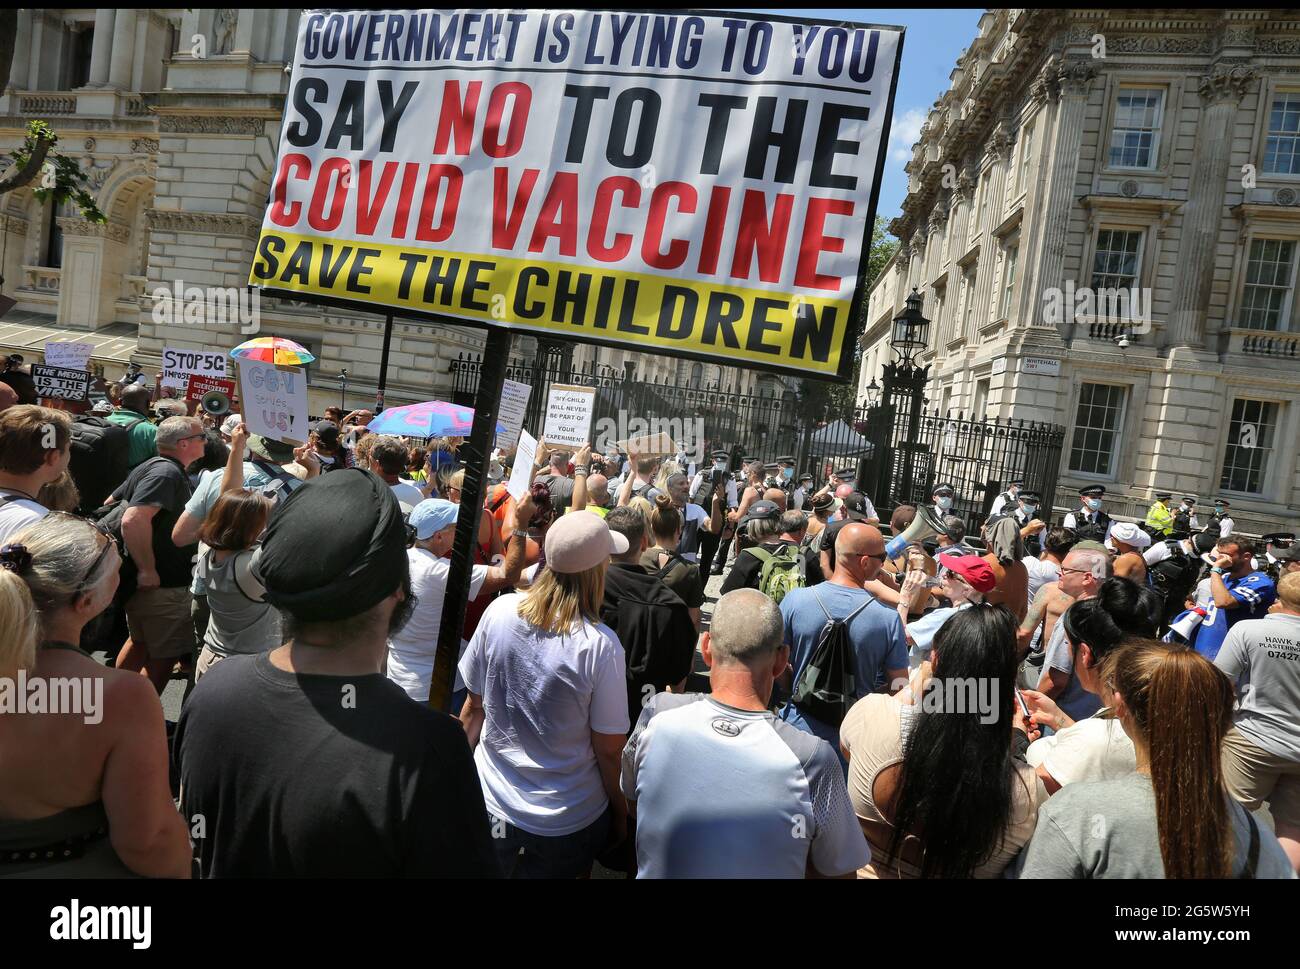 London, UK. 14th June, 2021. Protesters block Whitehall, and a large banner is seen reading ''Government is lying to you say no to the Covid Vaccine, Save the Children'' during the protest.Protesters gather outside Downing Street to protest against Boris Johnson's announcement of an extension of the lockdown regulations in the UK which they believe infringe their human rights they also protest against continued wearing of masks and being subjected to the vaccination program. Credit: Martin Pope/SOPA Images/ZUMA Wire/Alamy Live News Stock Photo